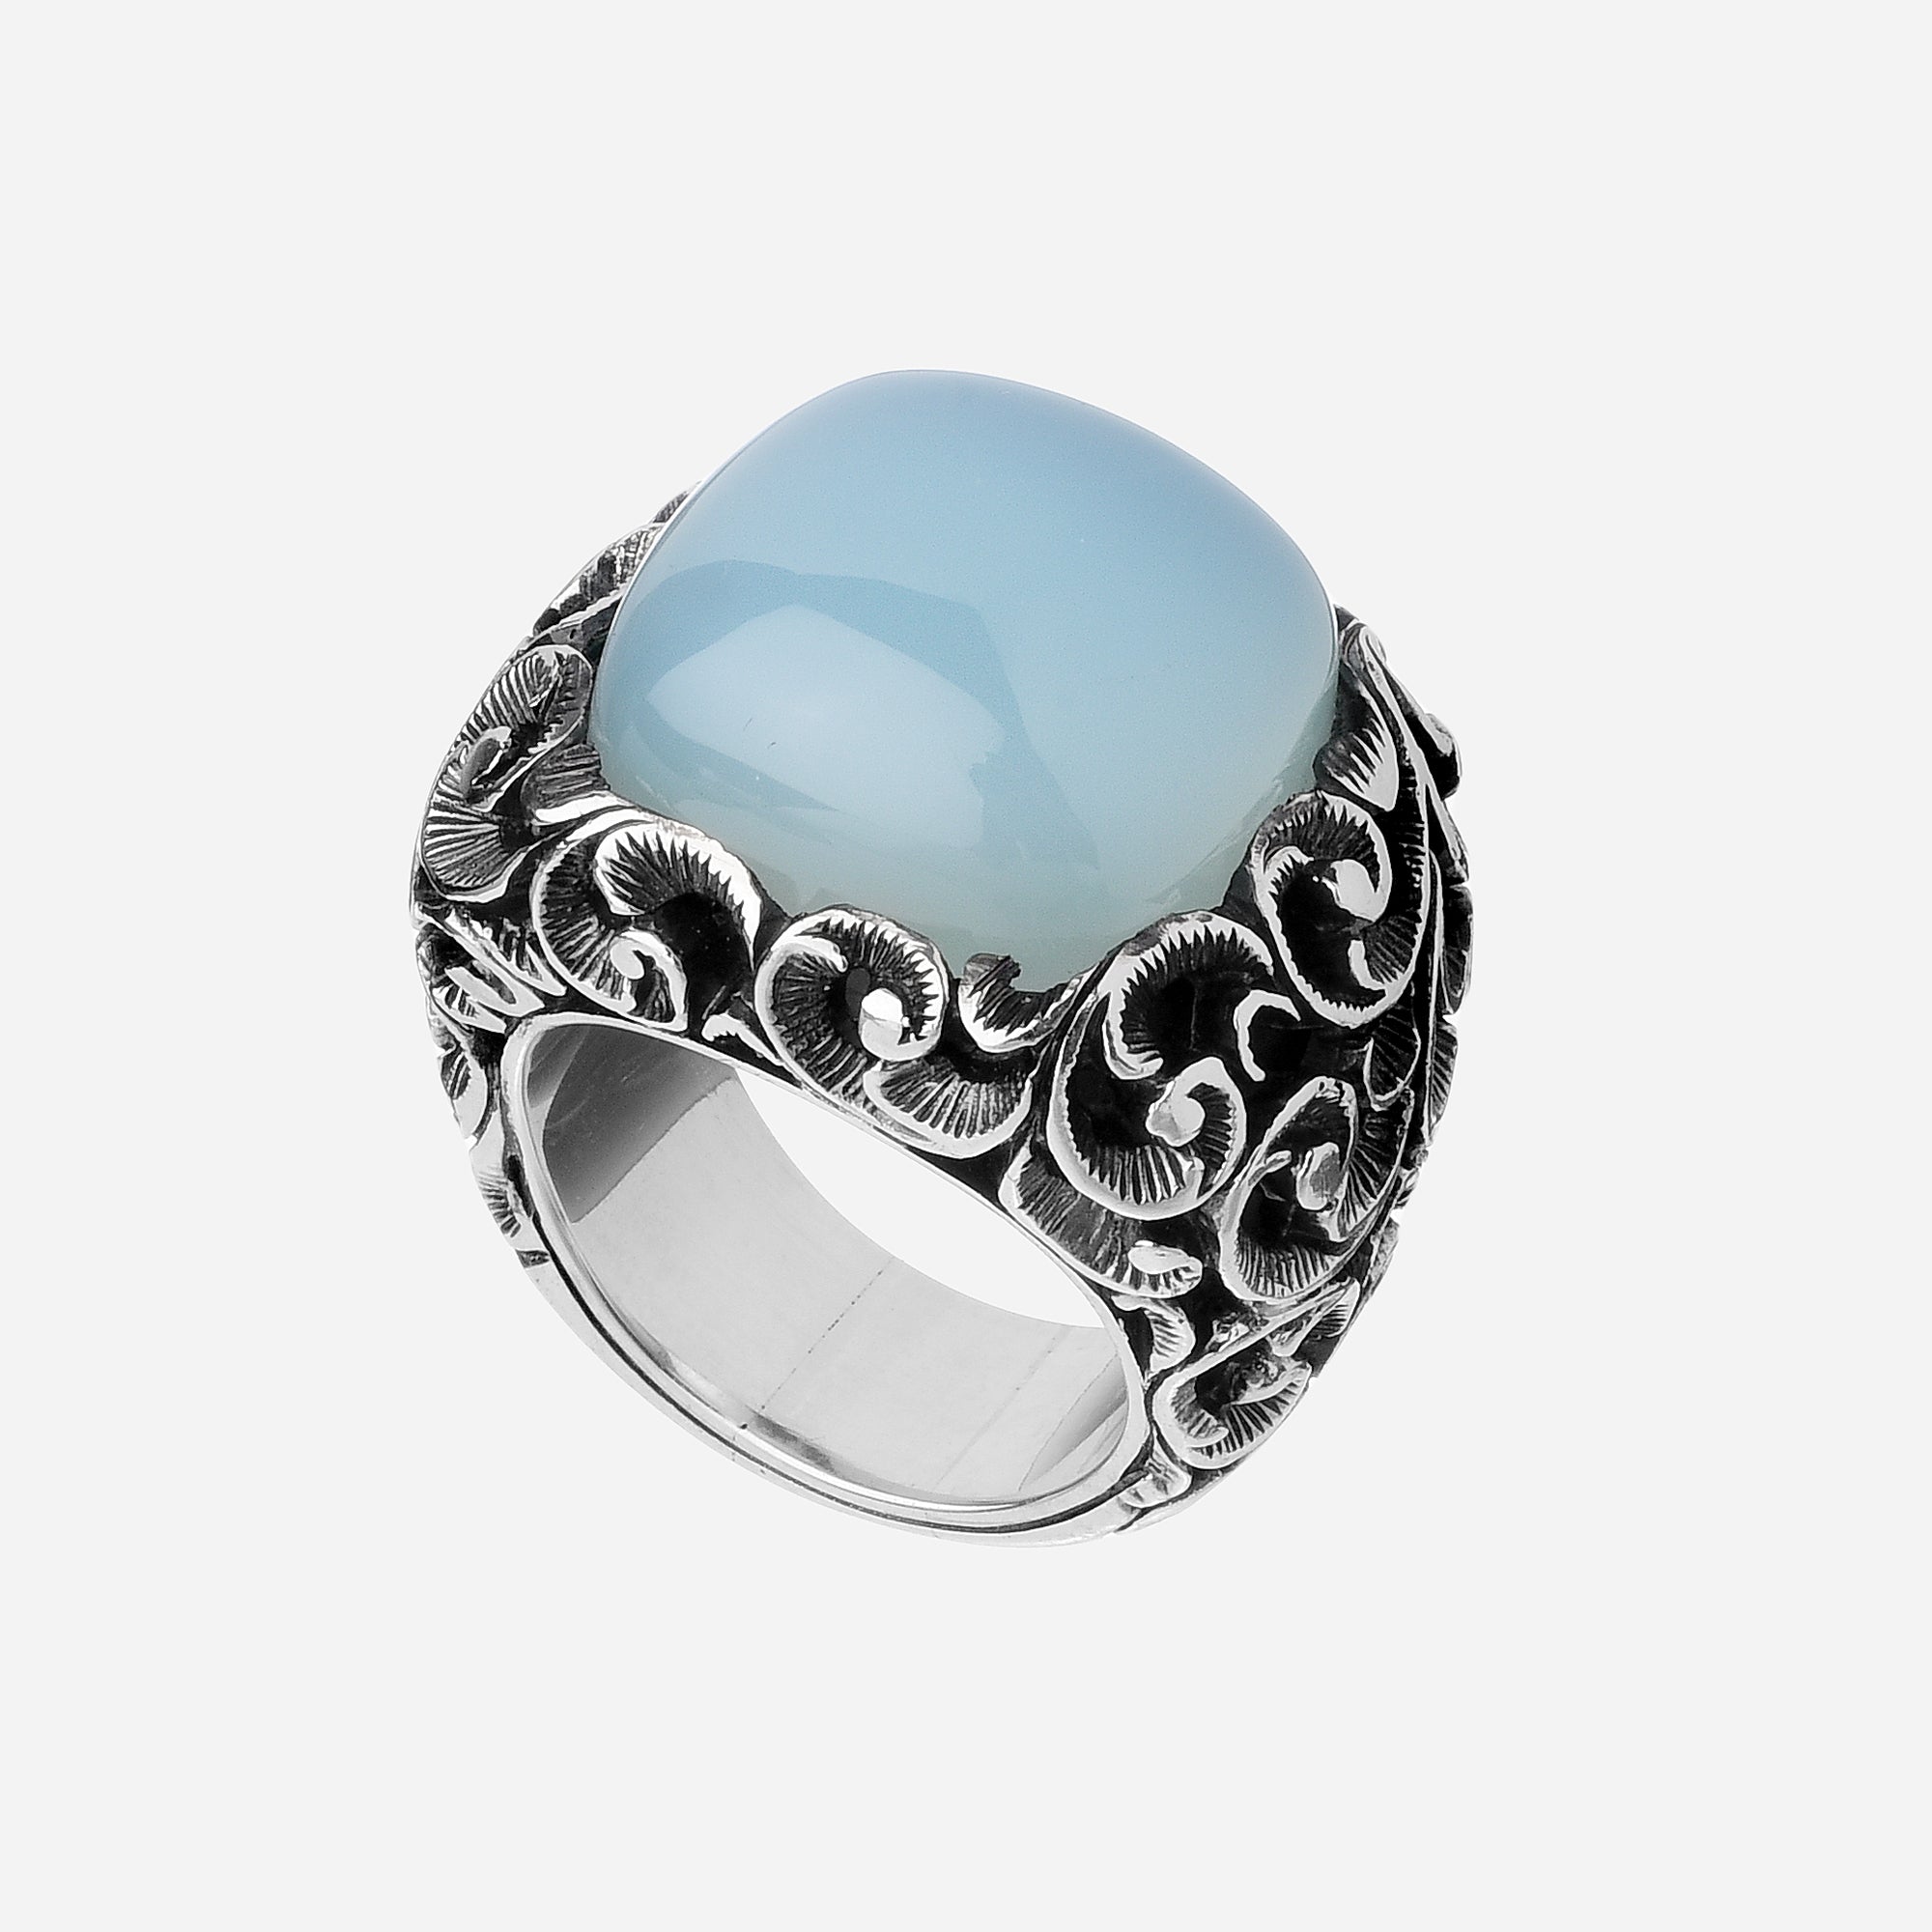 Ring with cabochon stone